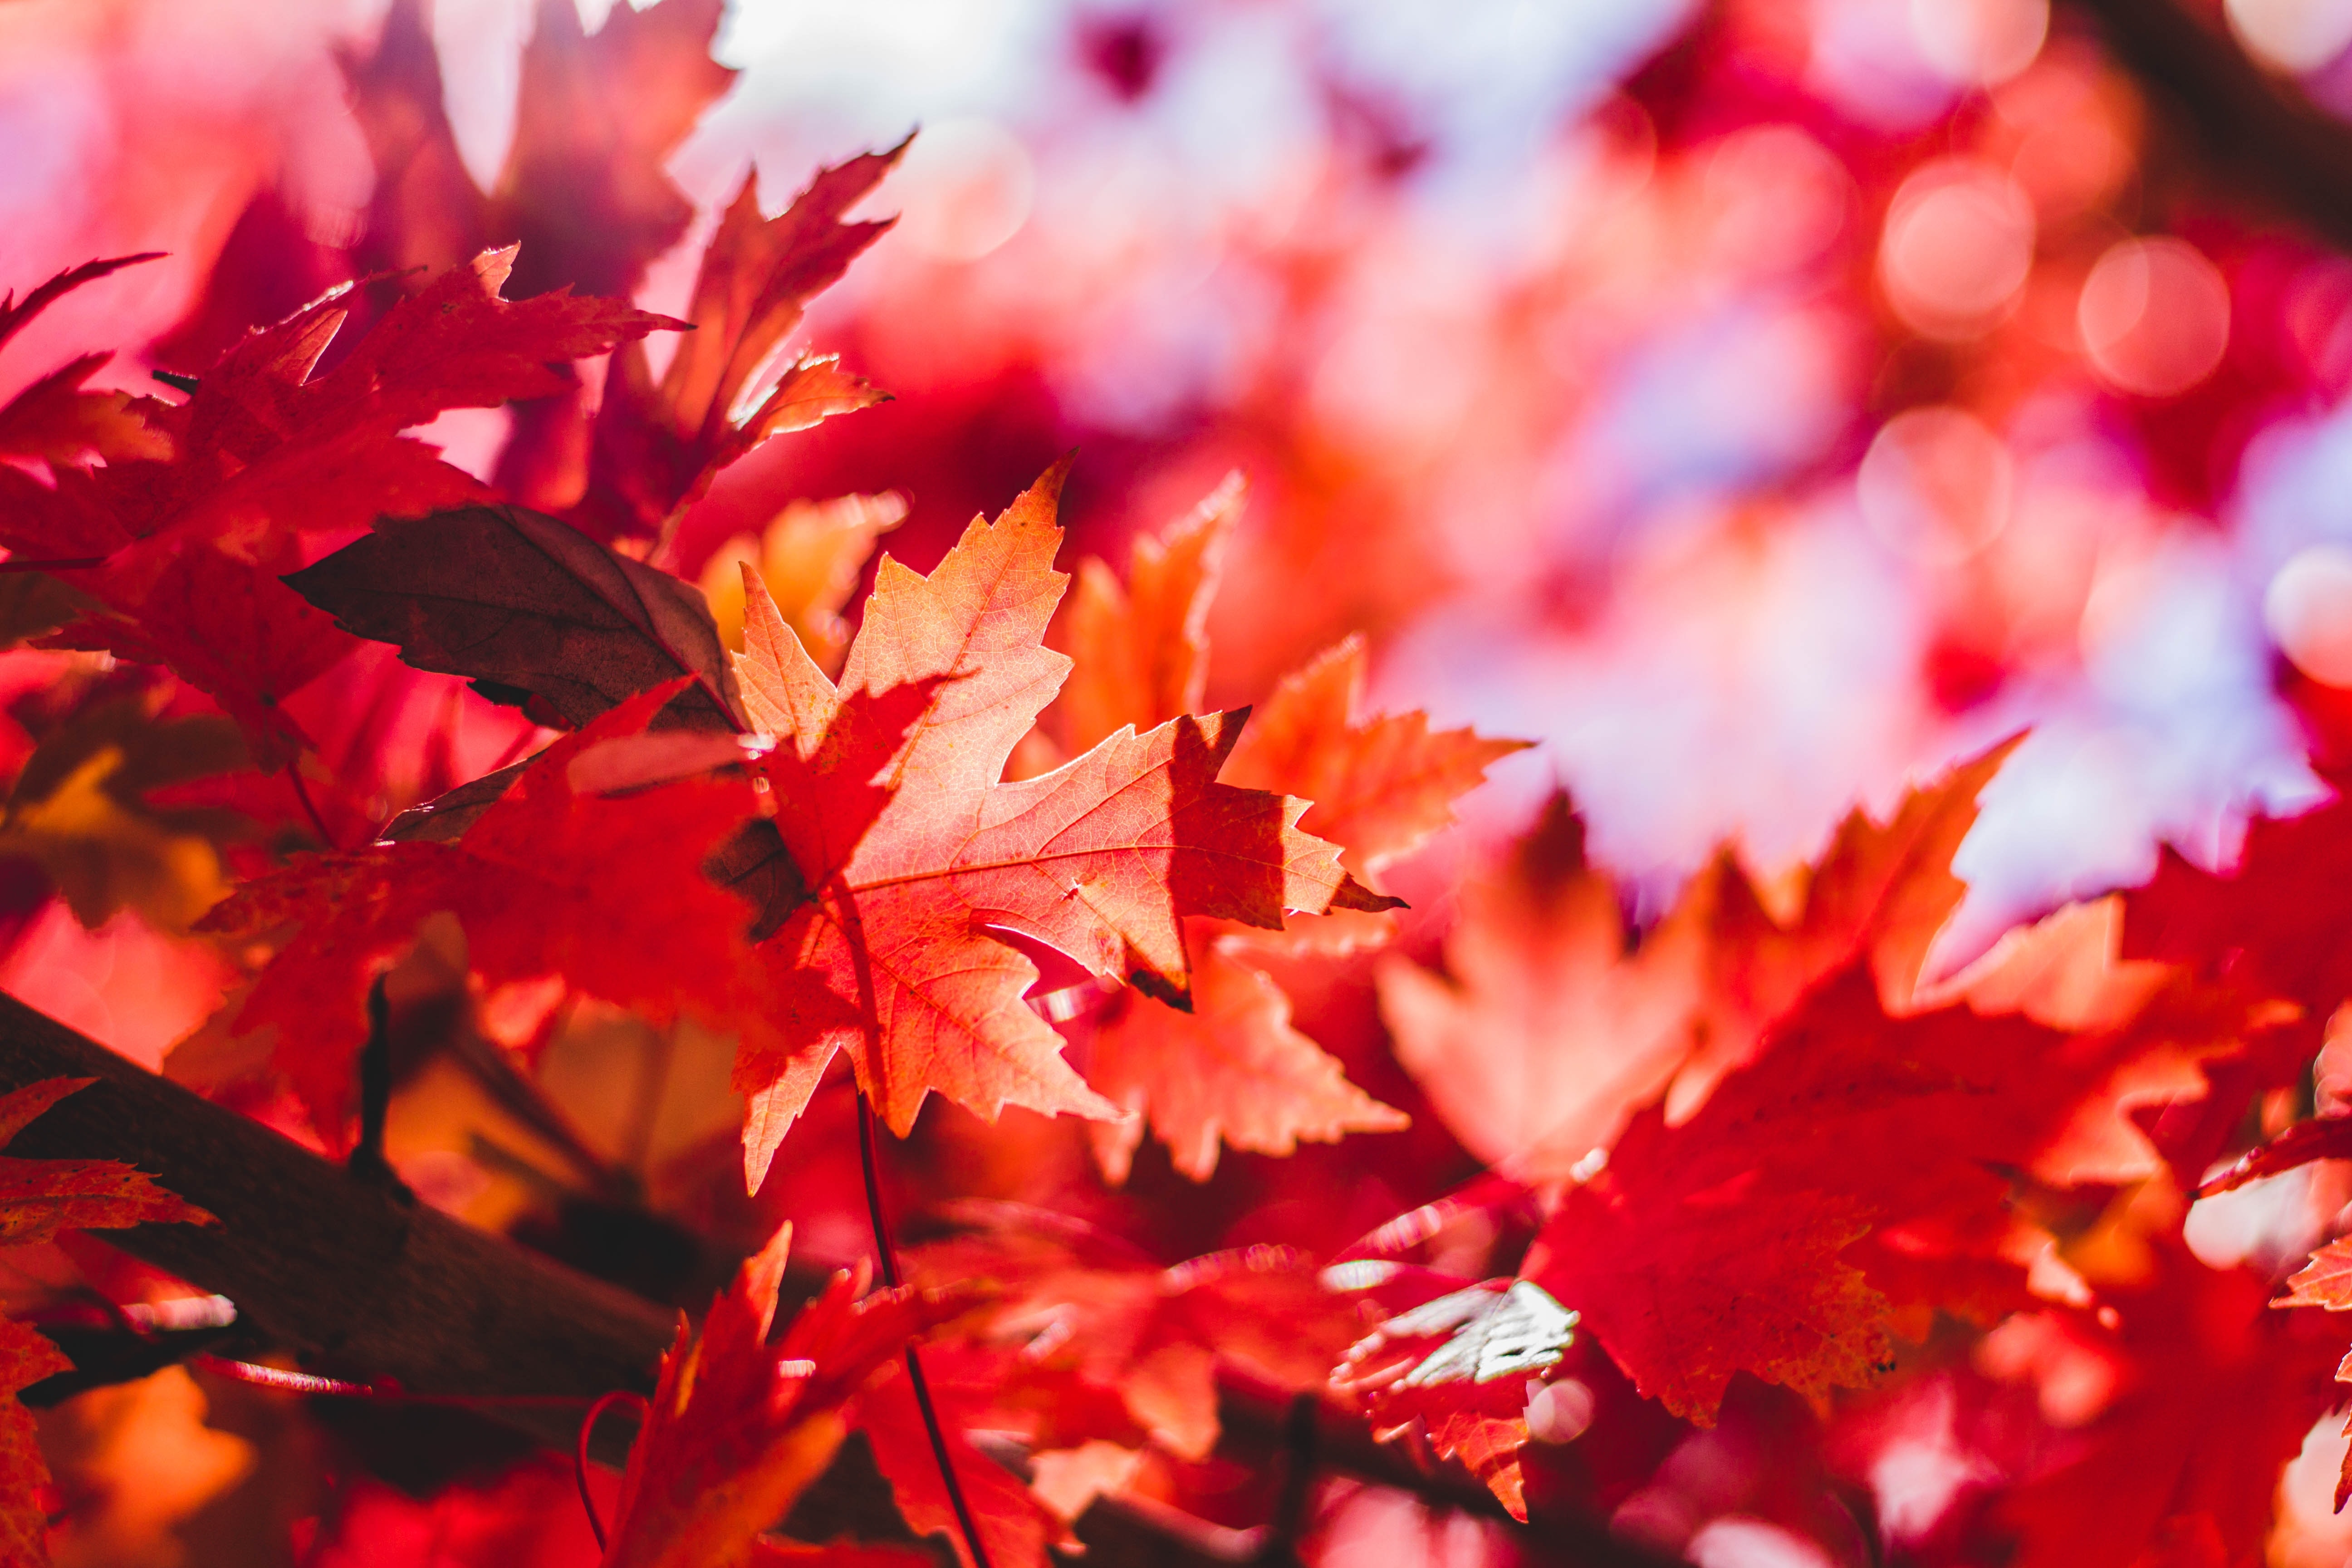 HD wallpaper, Autumn, Aesthetic, Closeup, Red Maple Leaves, Fall, 5K